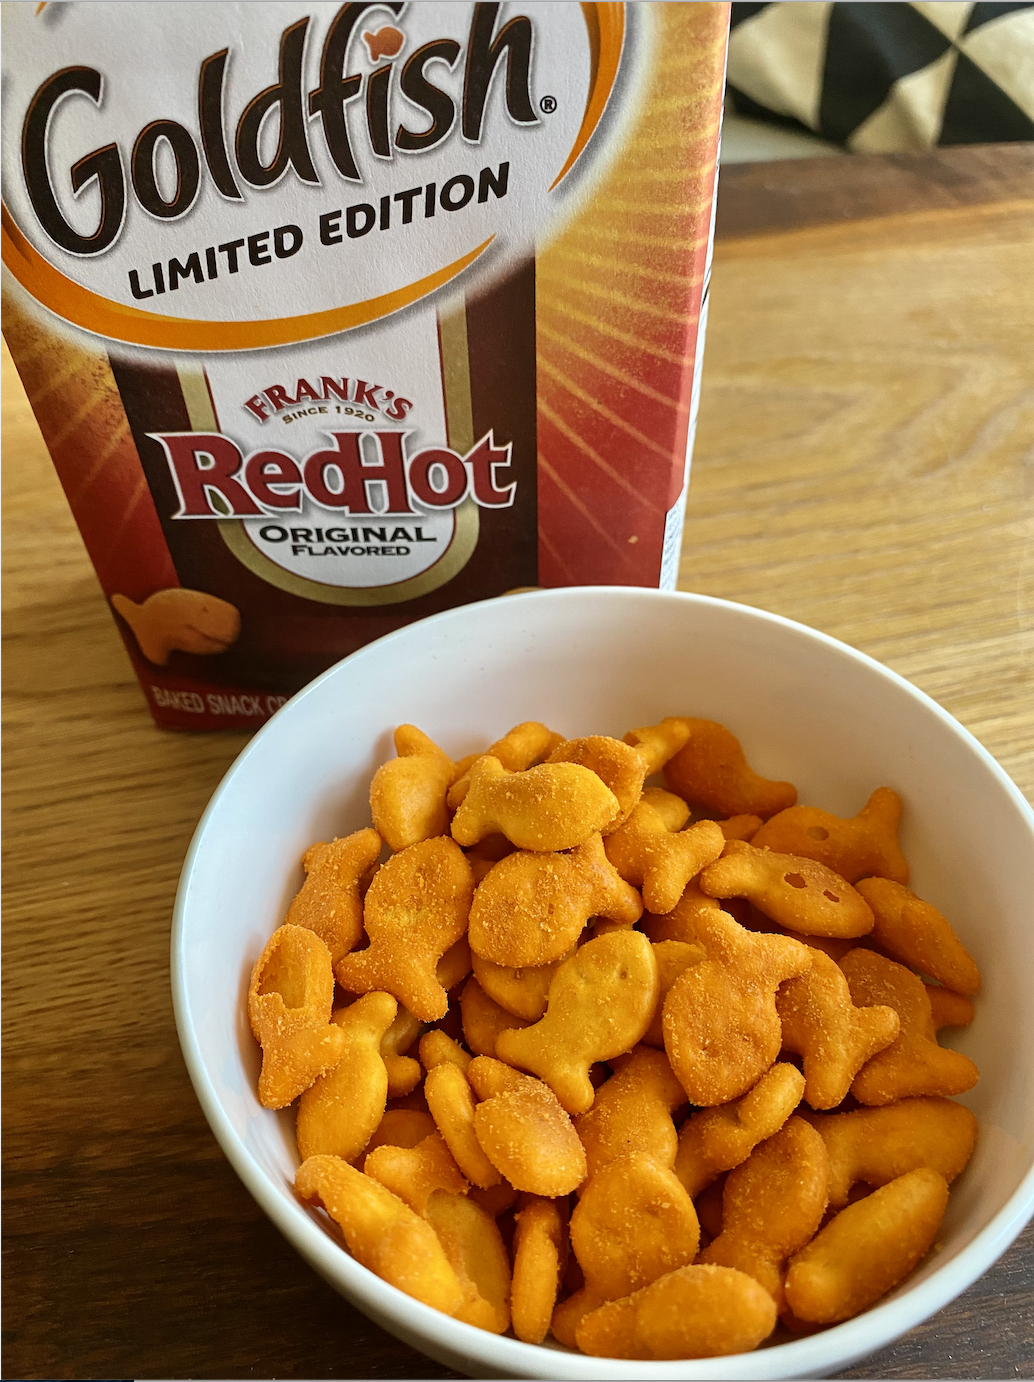 The Frank&#x27;s Red Hot Goldfish